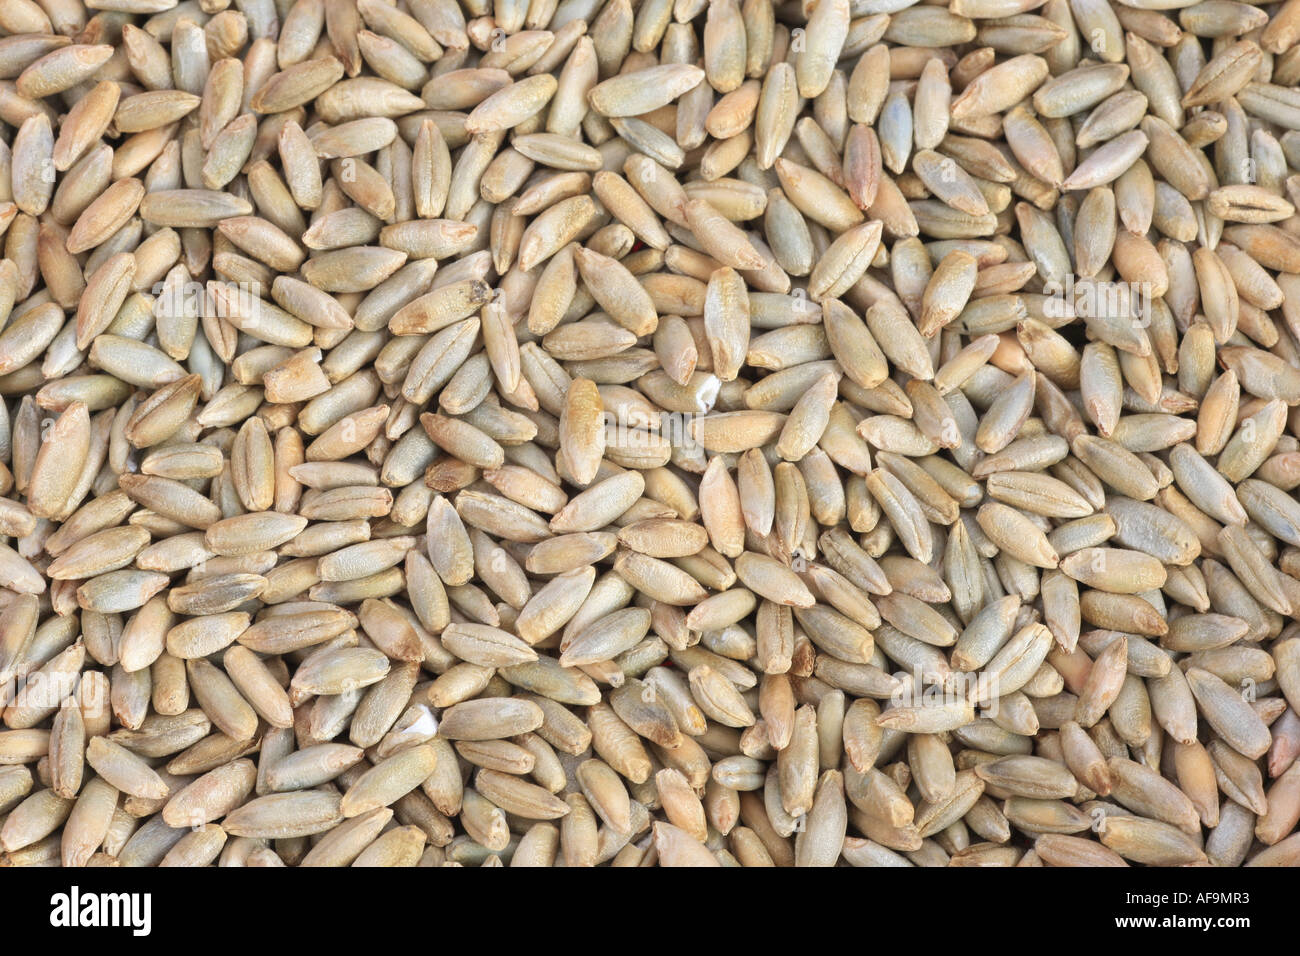 cultivated rye (Secale cereale), grains Stock Photo